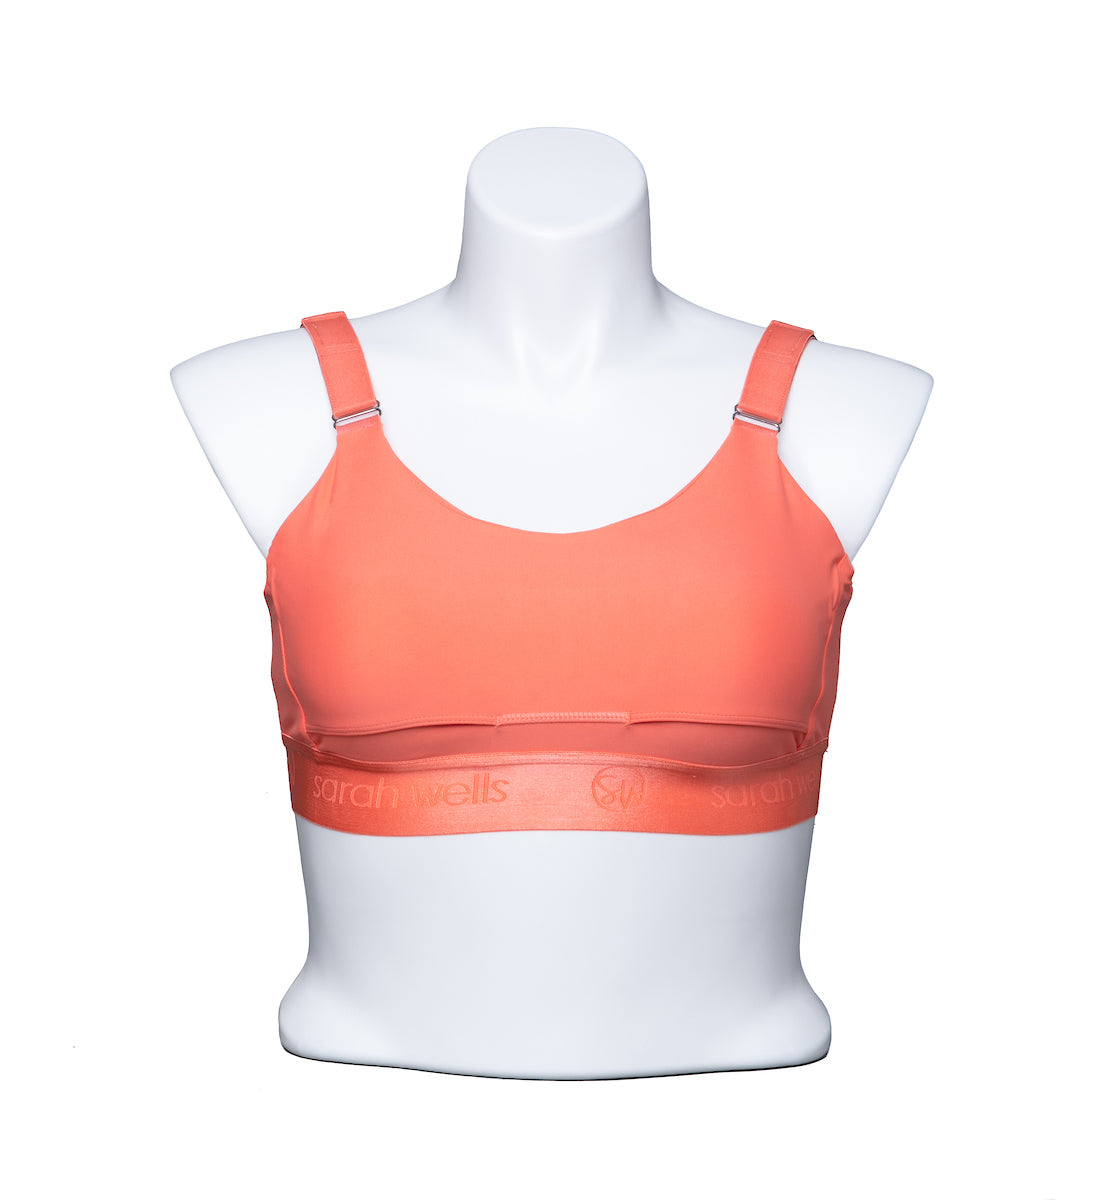 Journey Hands Free Pumping Bra (Creamsicle)